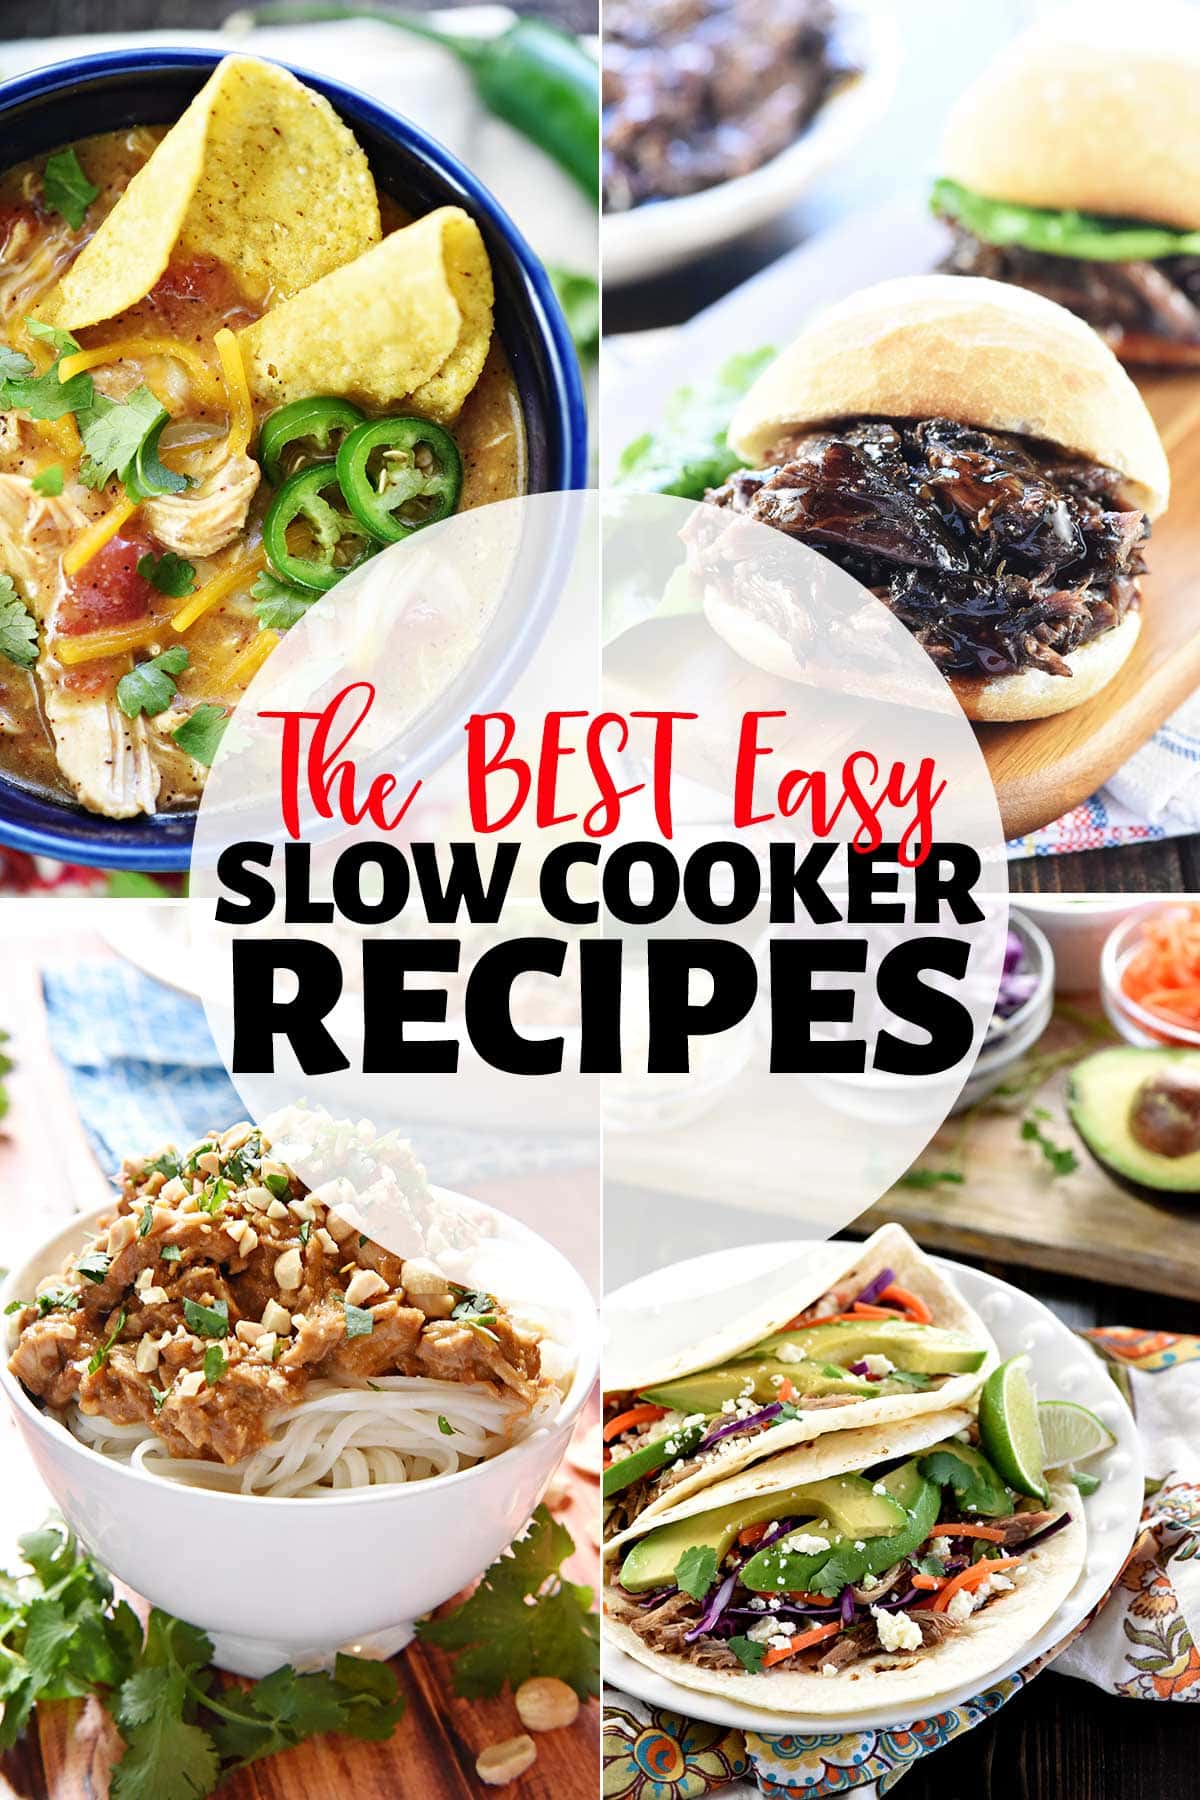 The BEST Slow Cooker Recipes Round-Up ~ you'll love this amazing collection of comforting crock pot dinners, flavorful tacos, hearty sandwiches, cozy soups, stews, and chilis, and even some breakfasts and desserts! Better yet, these popular and easy slow cooker recipes are made with real, unprocessed ingredients! | FiveHeartHome.com via @fivehearthome